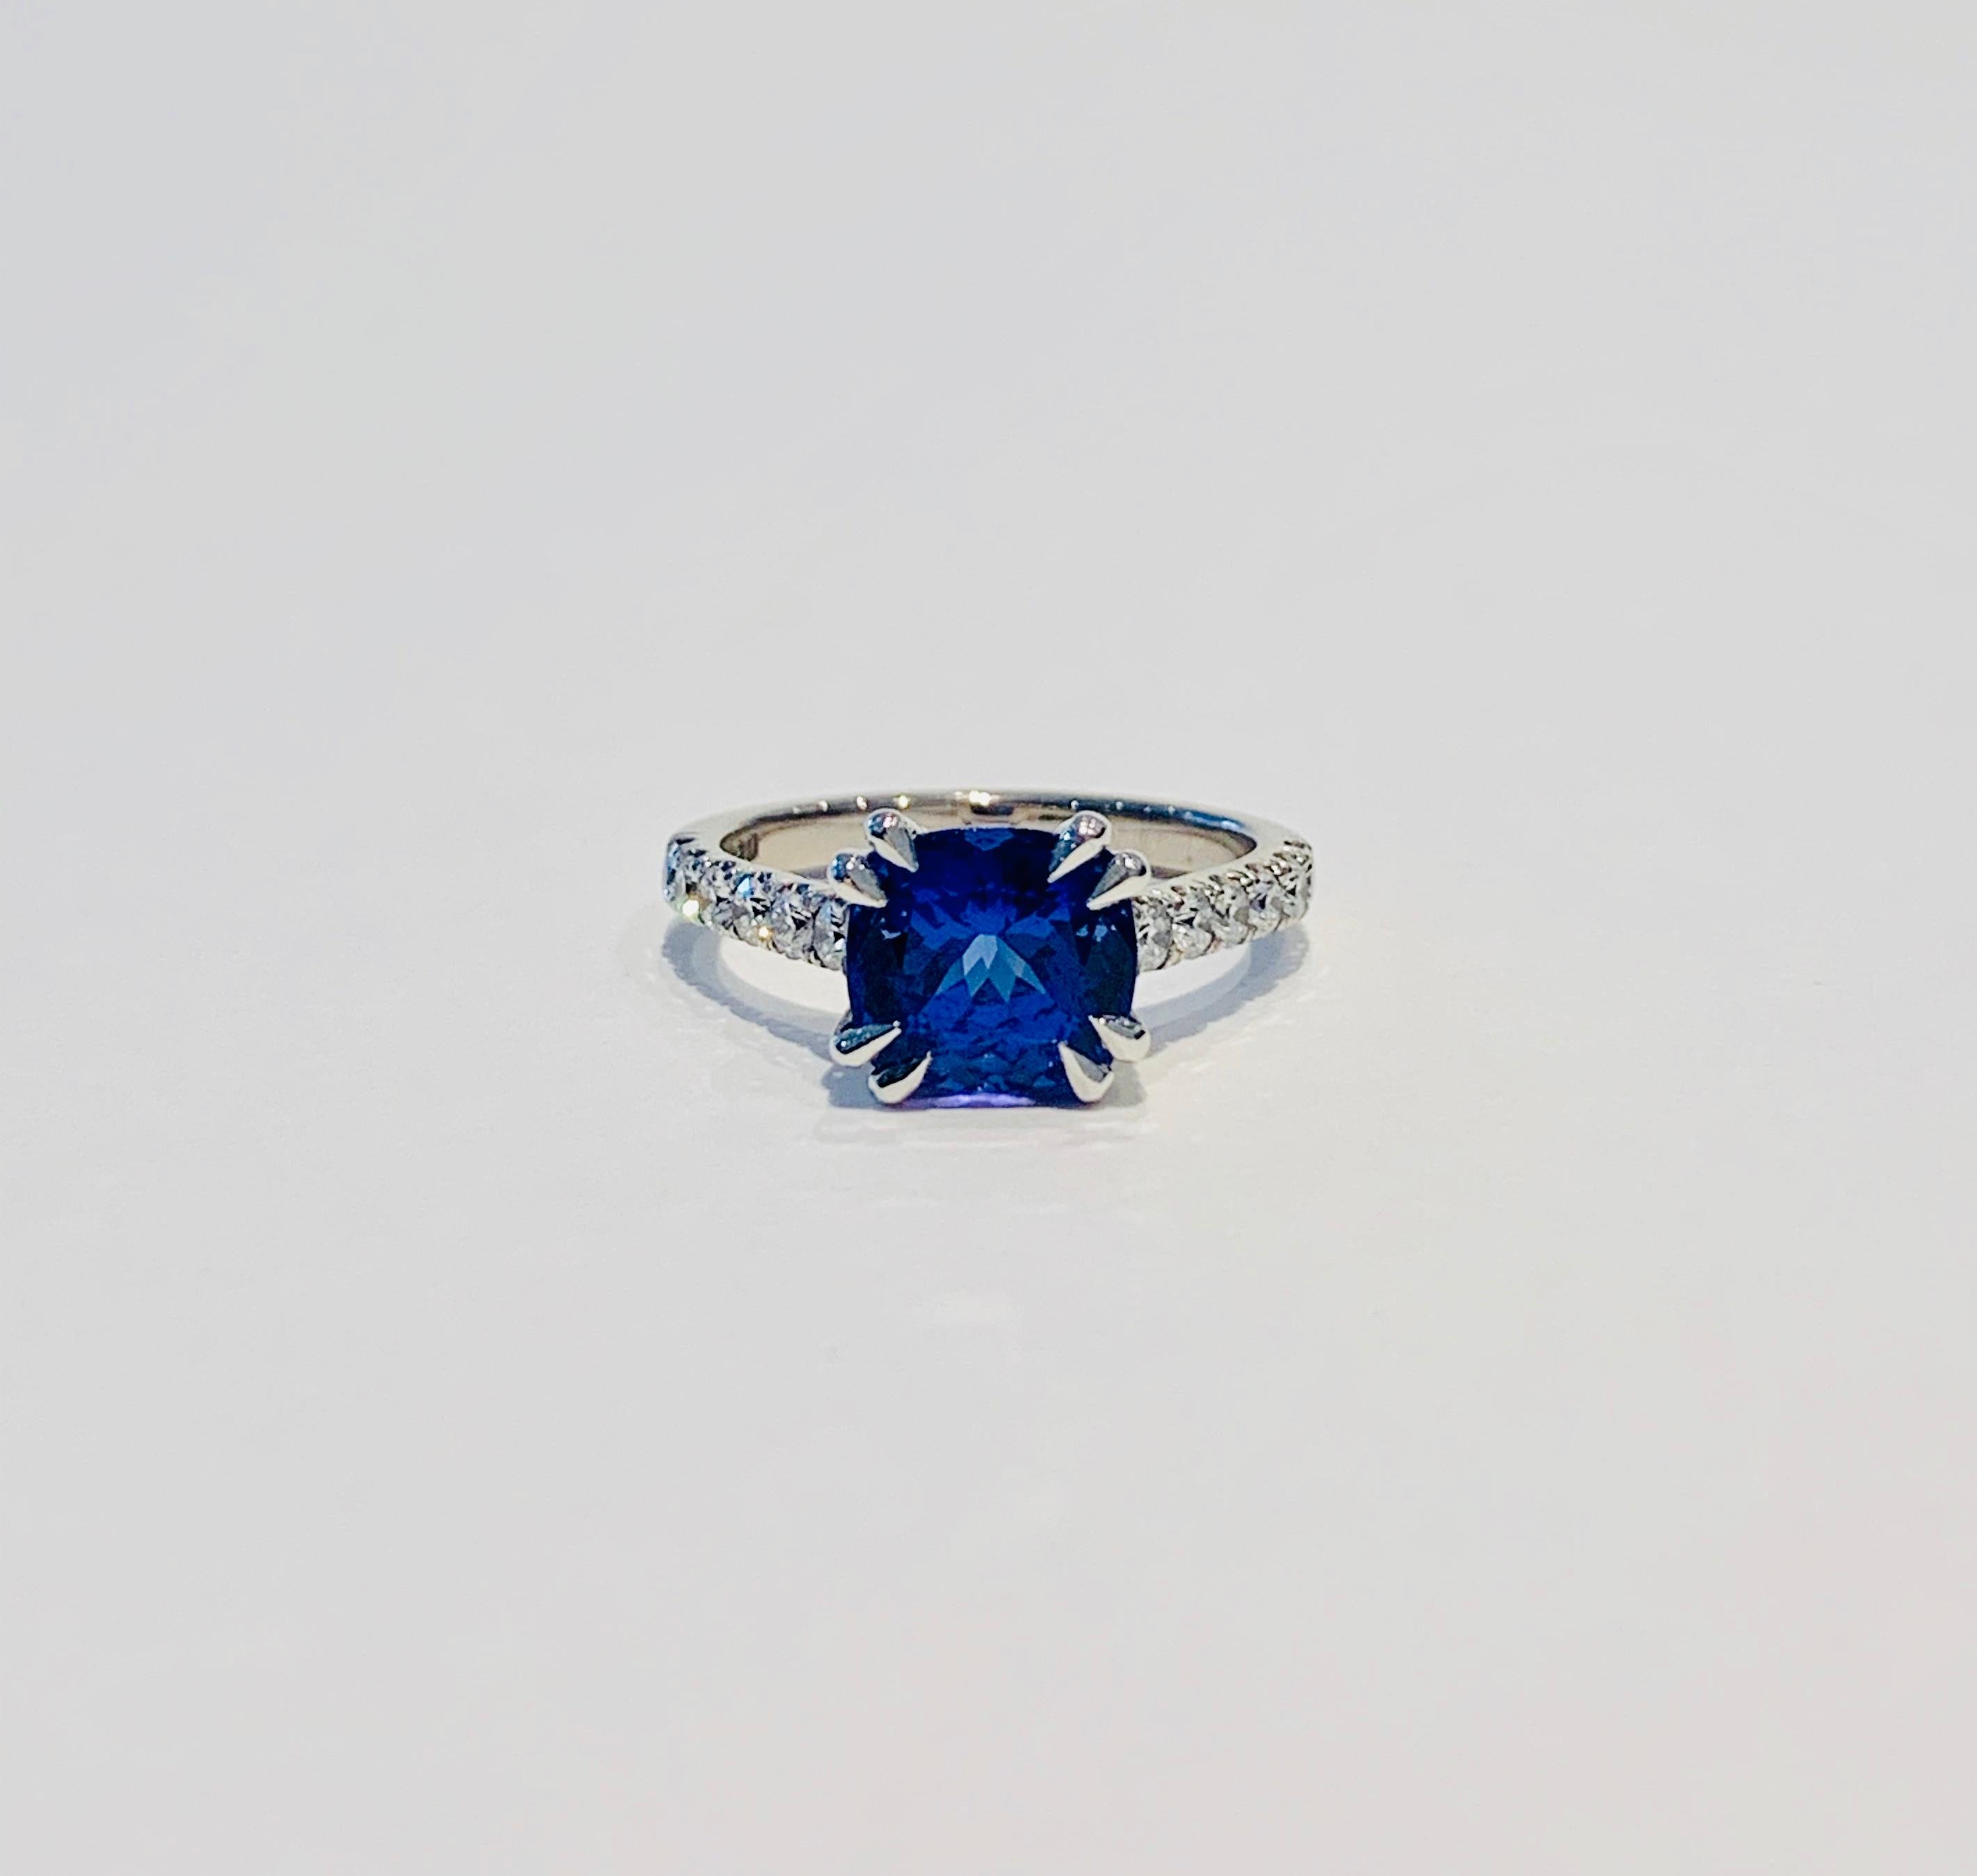 This premium stone is Tanzanite* at its best!  The velvety rich deep blue shows a little violet and has wonderful clarity.  A CAD was used to show this 7x 7 mm cushion cut Tanzanite at it best and the double claw setting gives it a very modern